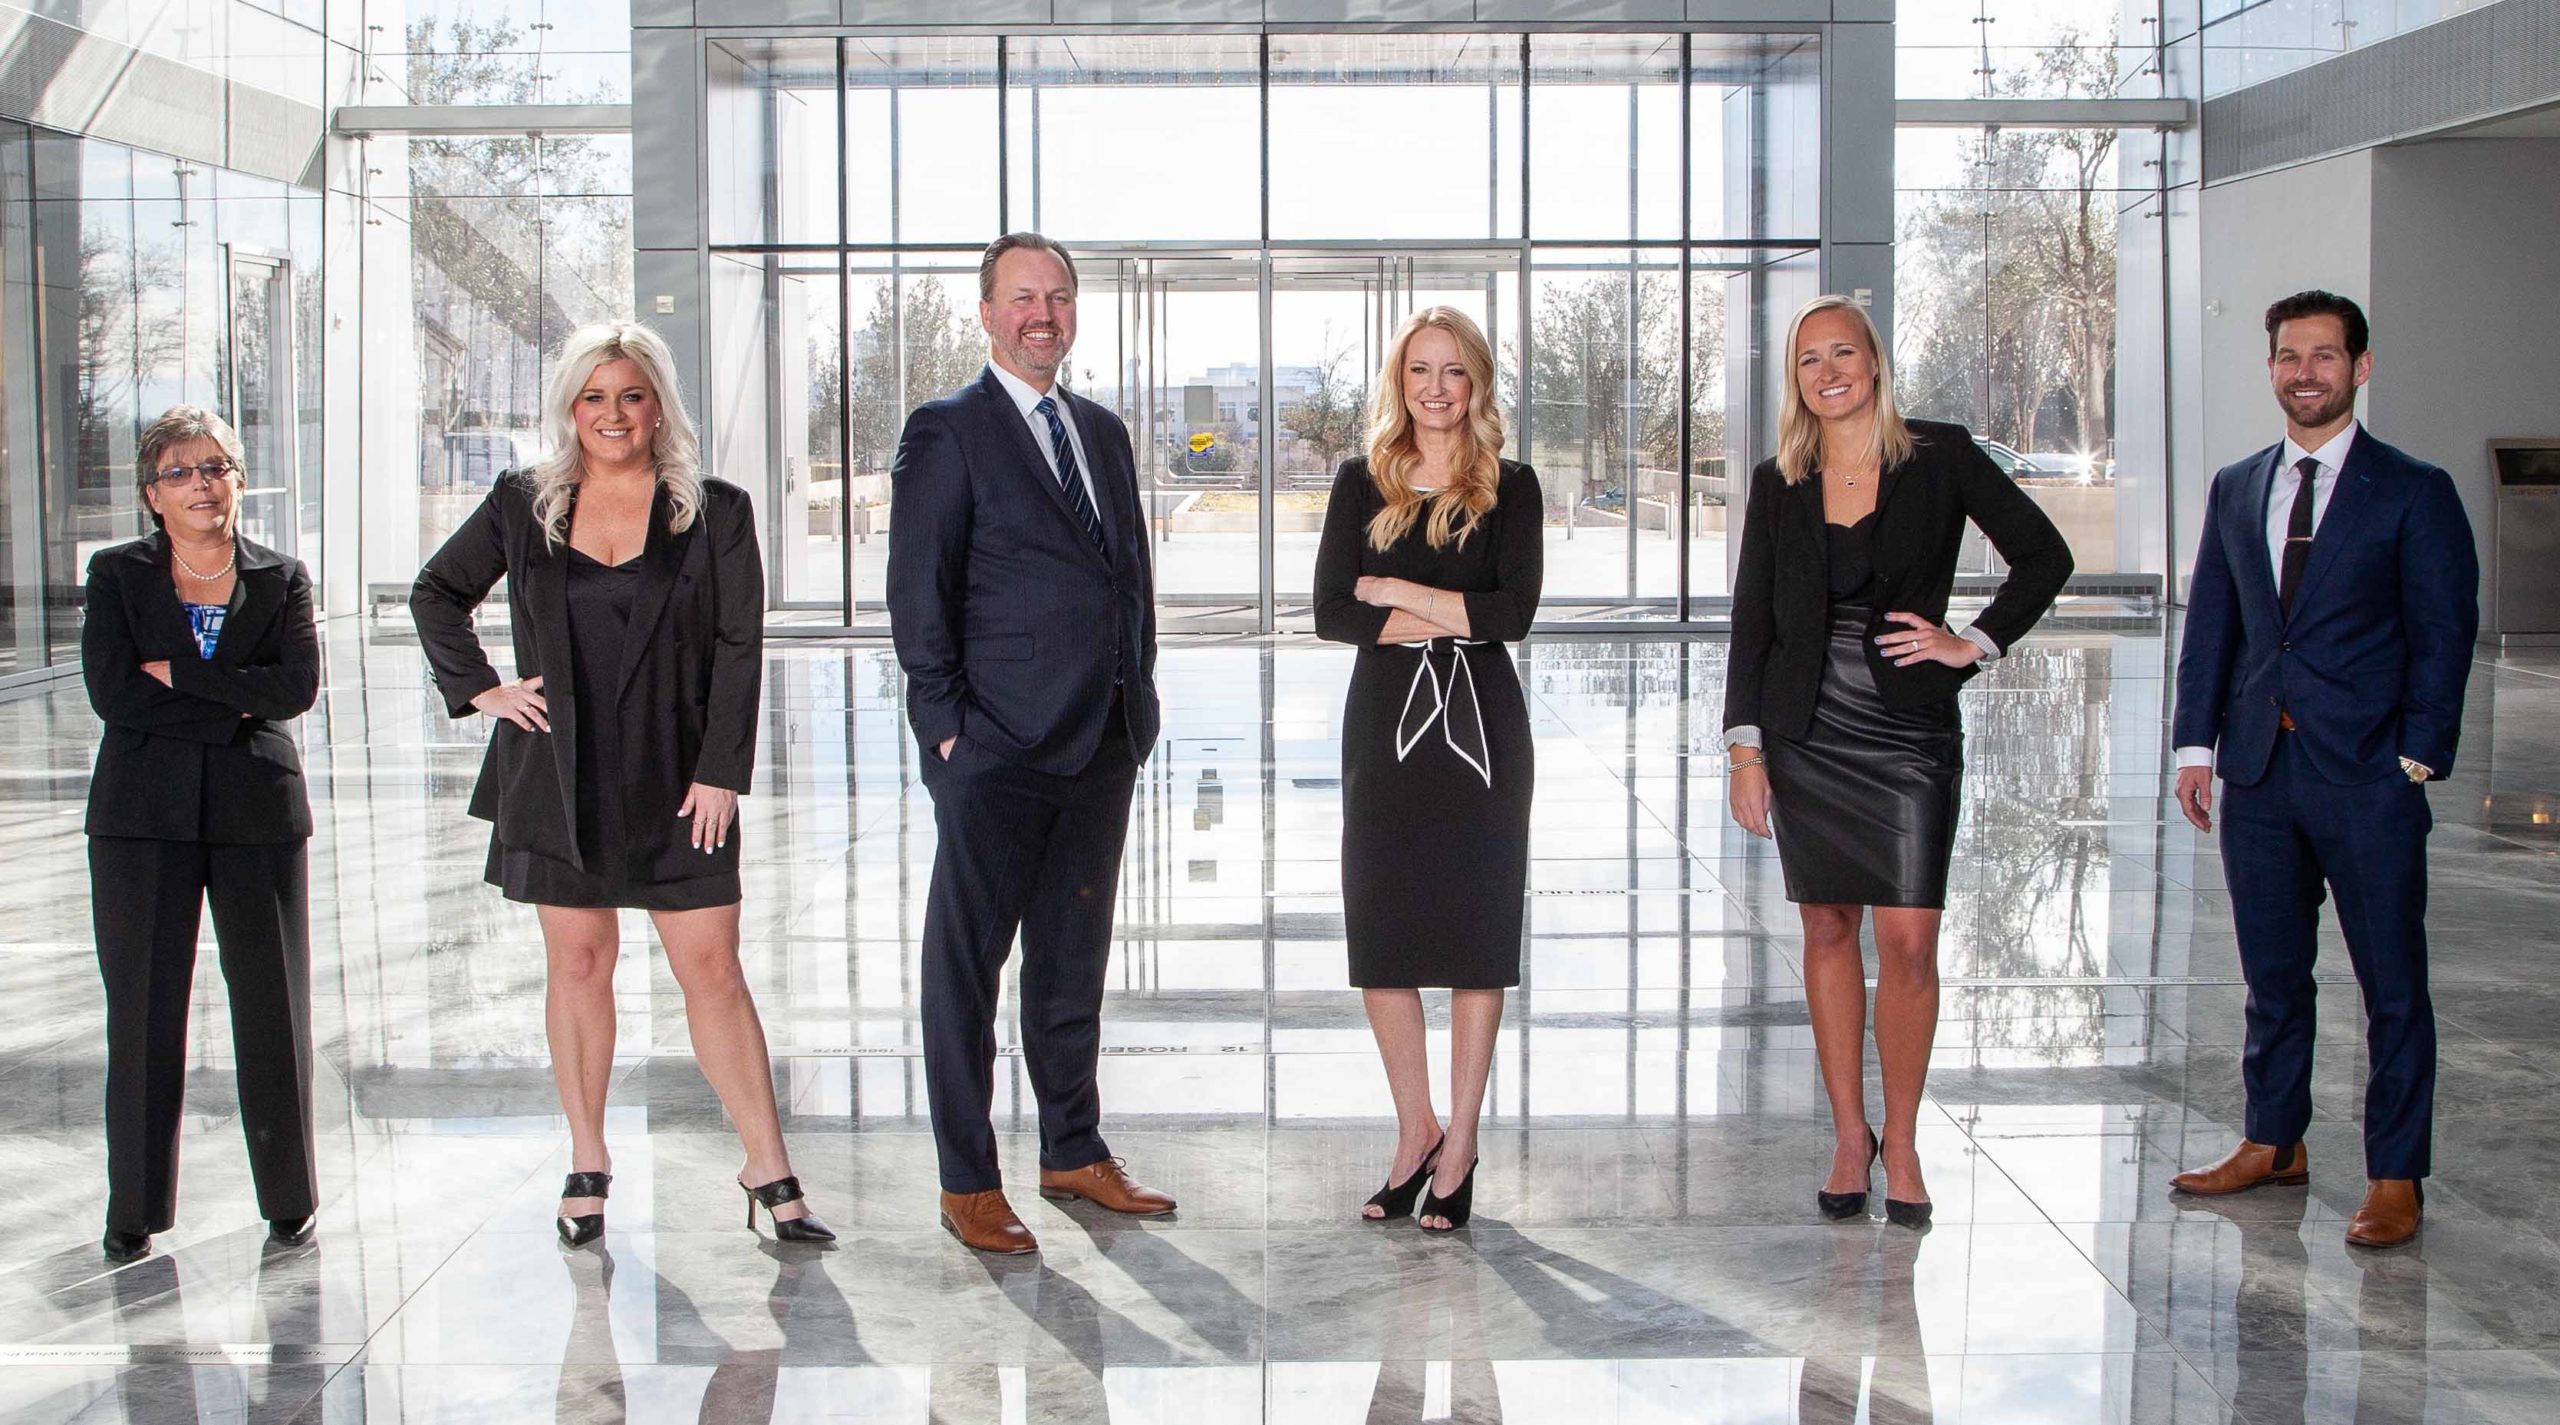 McCathern Family Law Attorneys